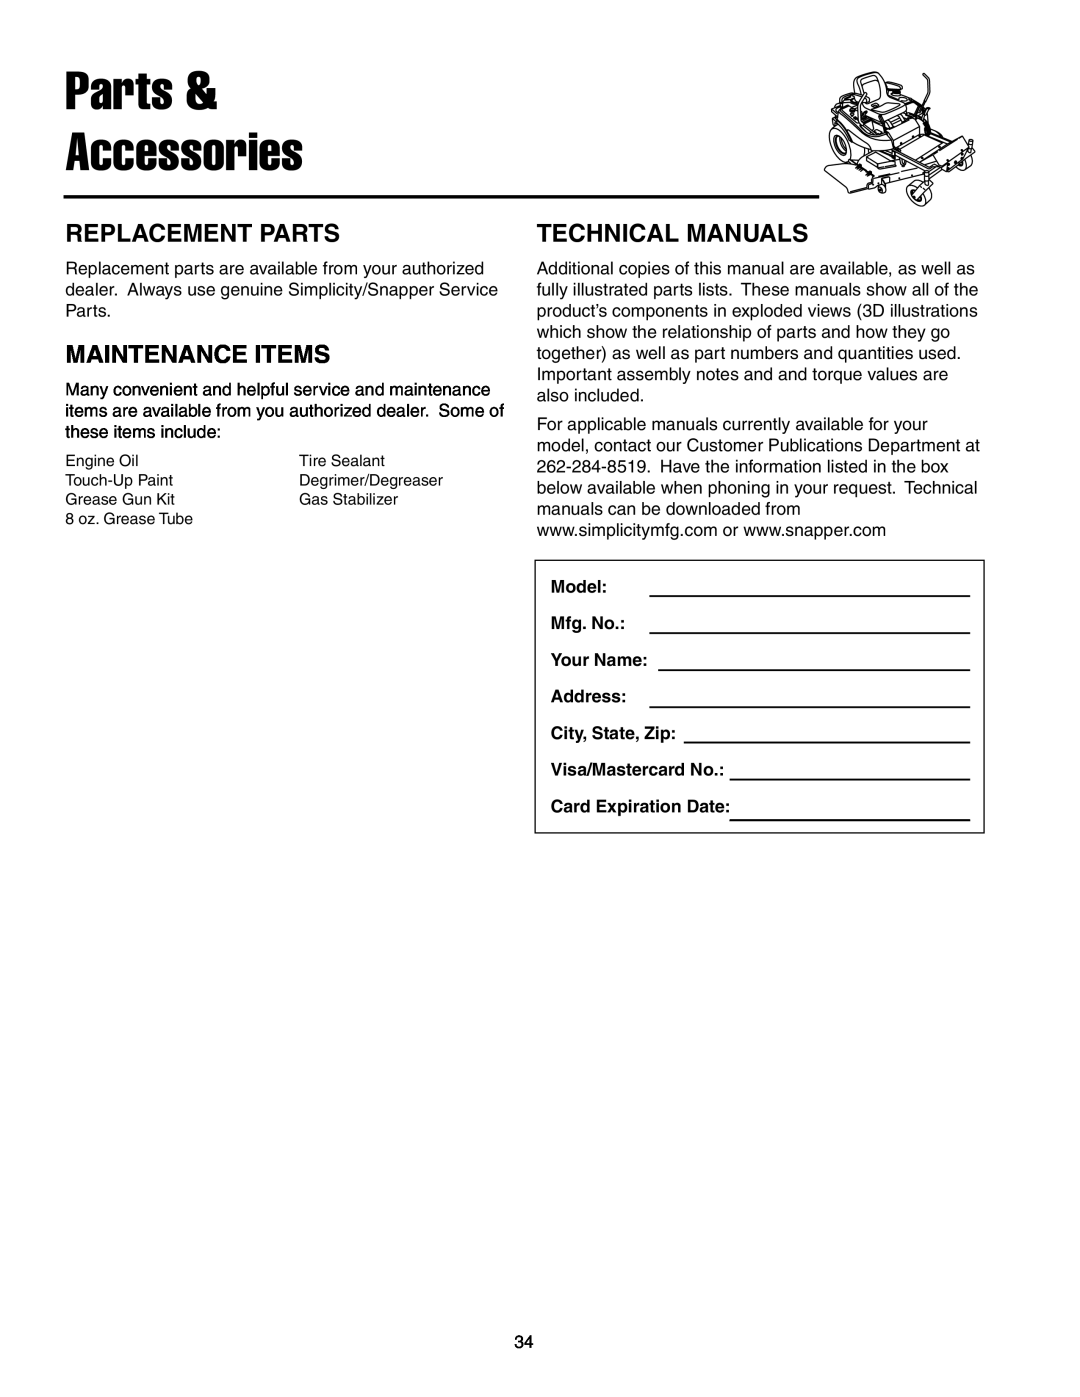 Simplicity 250 Z manual Replacement Parts, Maintenance Items, Technical Manuals, Parts & Accessories, Card Expiration Date 